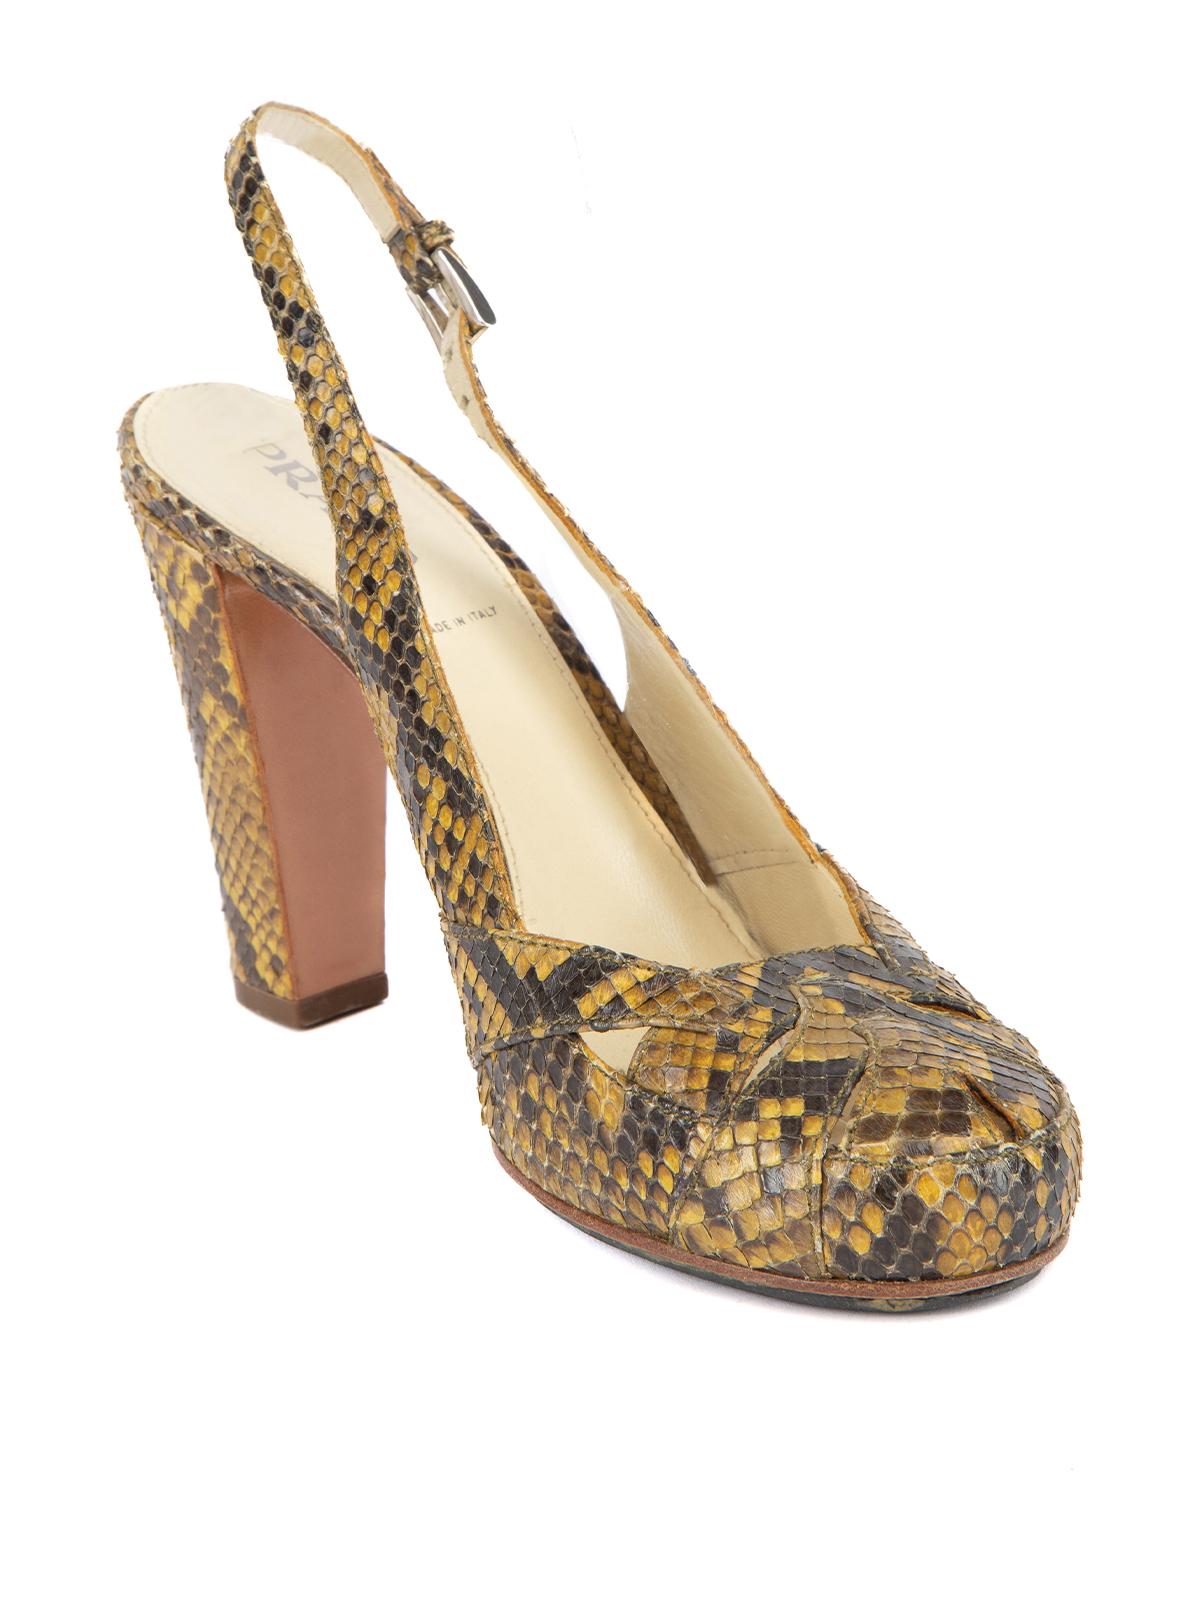 CONDITION is Good. Minor wear to heels is evident. Light wear to exterior snakeskin material on this used Prada designer resale item. Please note these shoes have been resoled for extra protection. Details Olive green and brown Python leather Heels